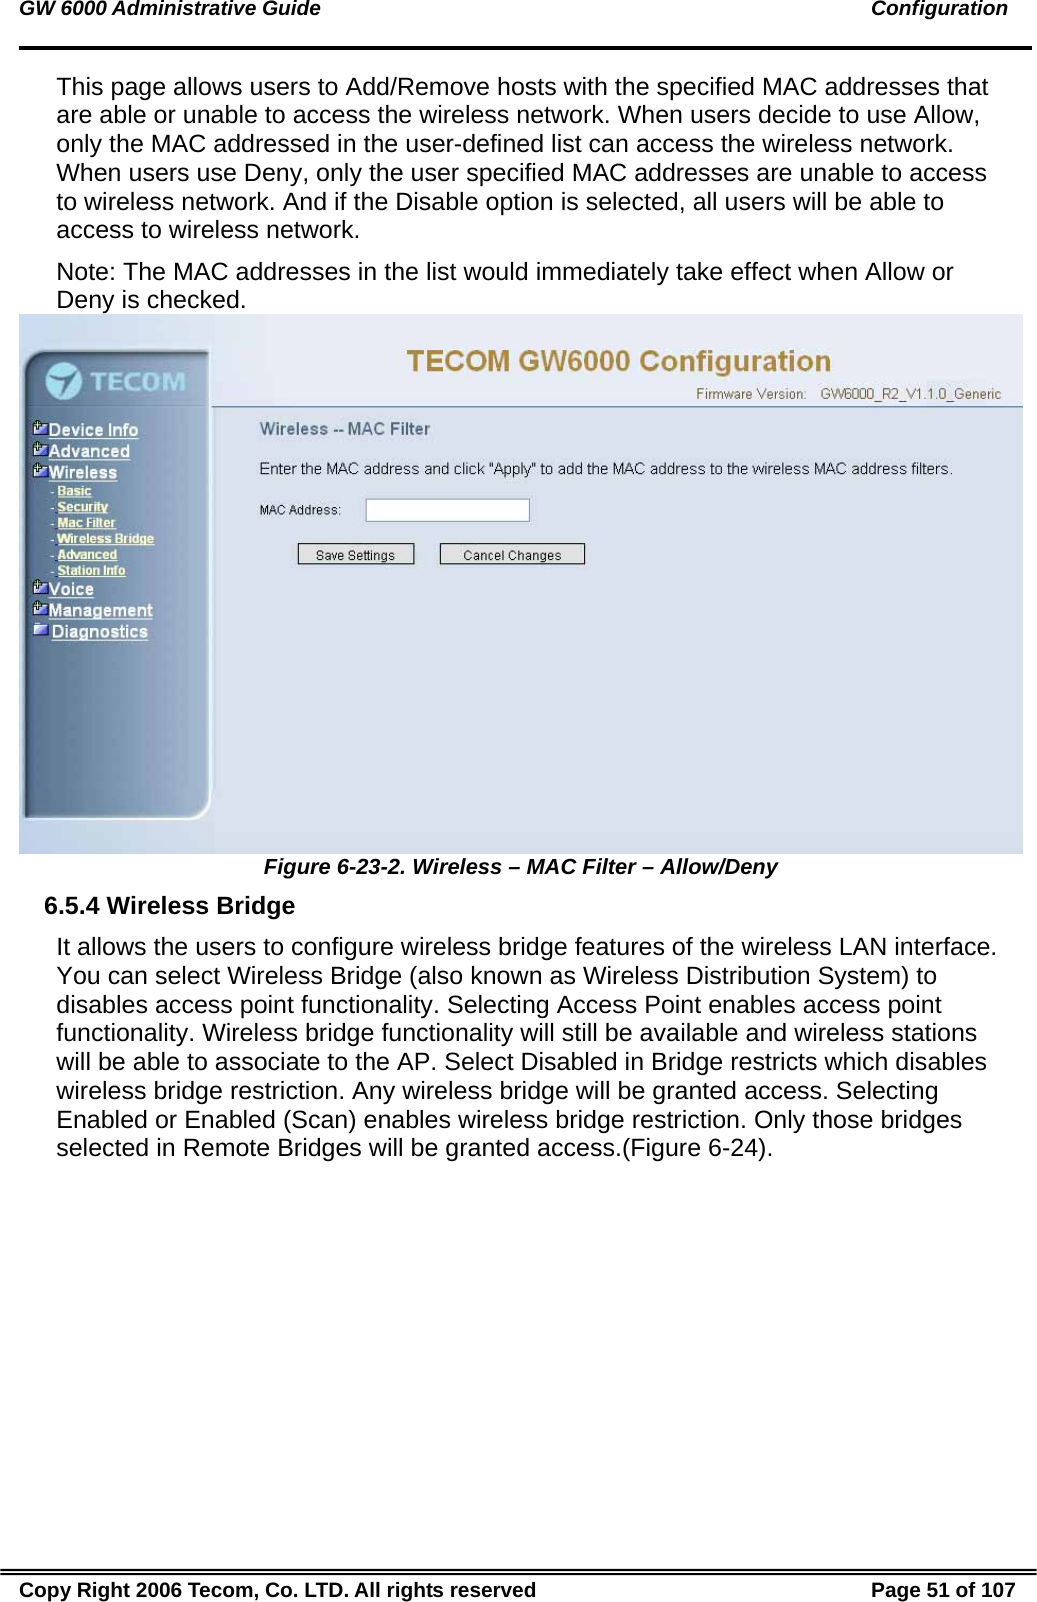 GW 6000 Administrative Guide                                                                                               Configuration This page allows users to Add/Remove hosts with the specified MAC addresses that are able or unable to access the wireless network. When users decide to use Allow, only the MAC addressed in the user-defined list can access the wireless network. When users use Deny, only the user specified MAC addresses are unable to access to wireless network. And if the Disable option is selected, all users will be able to access to wireless network. Note: The MAC addresses in the list would immediately take effect when Allow or Deny is checked.   Figure 6-23-2. Wireless – MAC Filter – Allow/Deny 6.5.4 Wireless Bridge It allows the users to configure wireless bridge features of the wireless LAN interface. You can select Wireless Bridge (also known as Wireless Distribution System) to disables access point functionality. Selecting Access Point enables access point functionality. Wireless bridge functionality will still be available and wireless stations will be able to associate to the AP. Select Disabled in Bridge restricts which disables wireless bridge restriction. Any wireless bridge will be granted access. Selecting Enabled or Enabled (Scan) enables wireless bridge restriction. Only those bridges selected in Remote Bridges will be granted access.(Figure 6-24). Copy Right 2006 Tecom, Co. LTD. All rights reserved  Page 51 of 107 